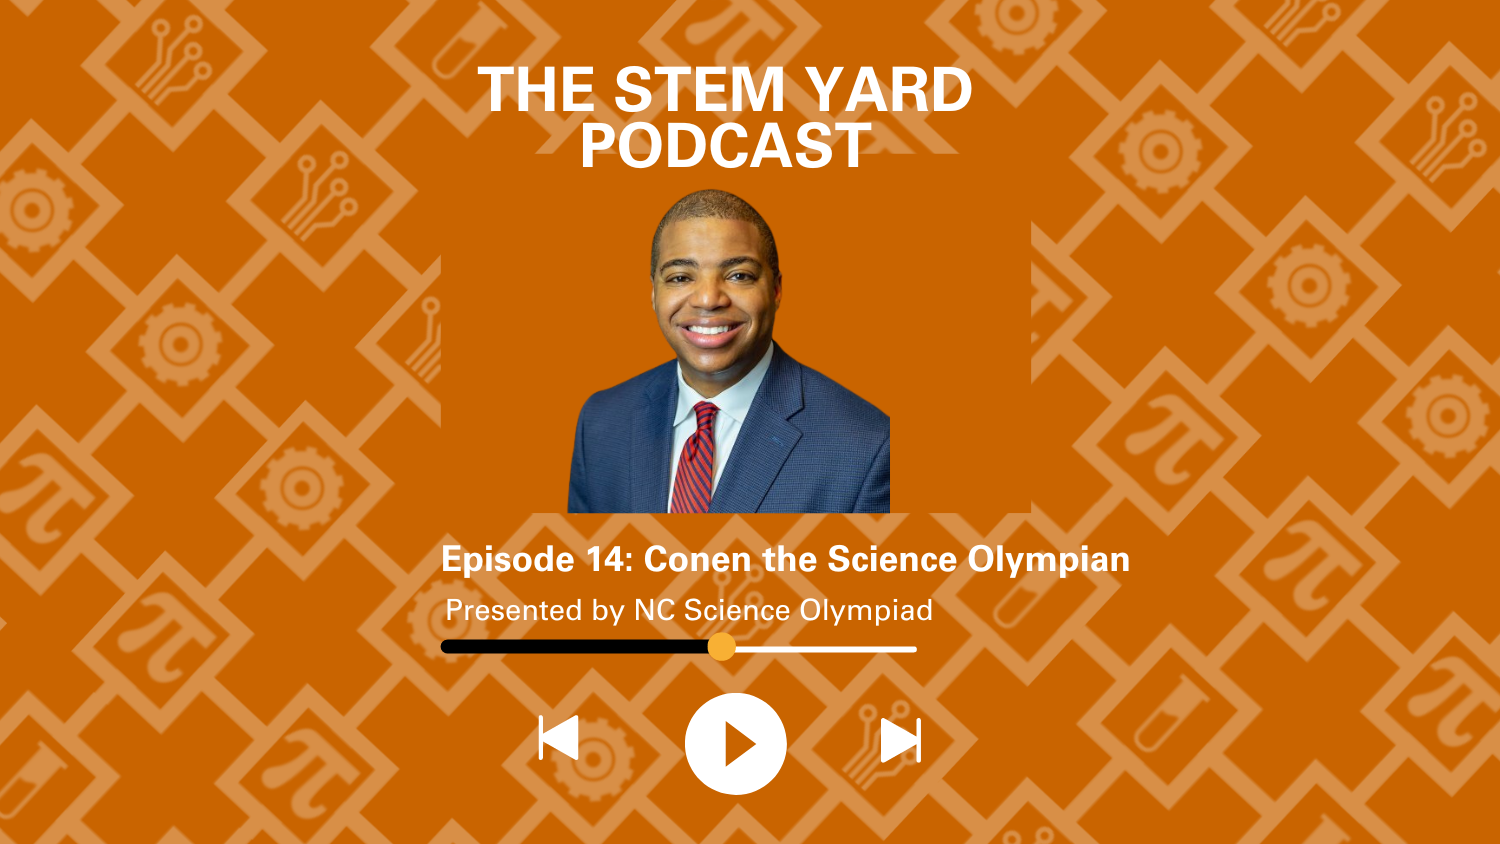 The STEM Yard Episode 13 - Conen the Science Olympian